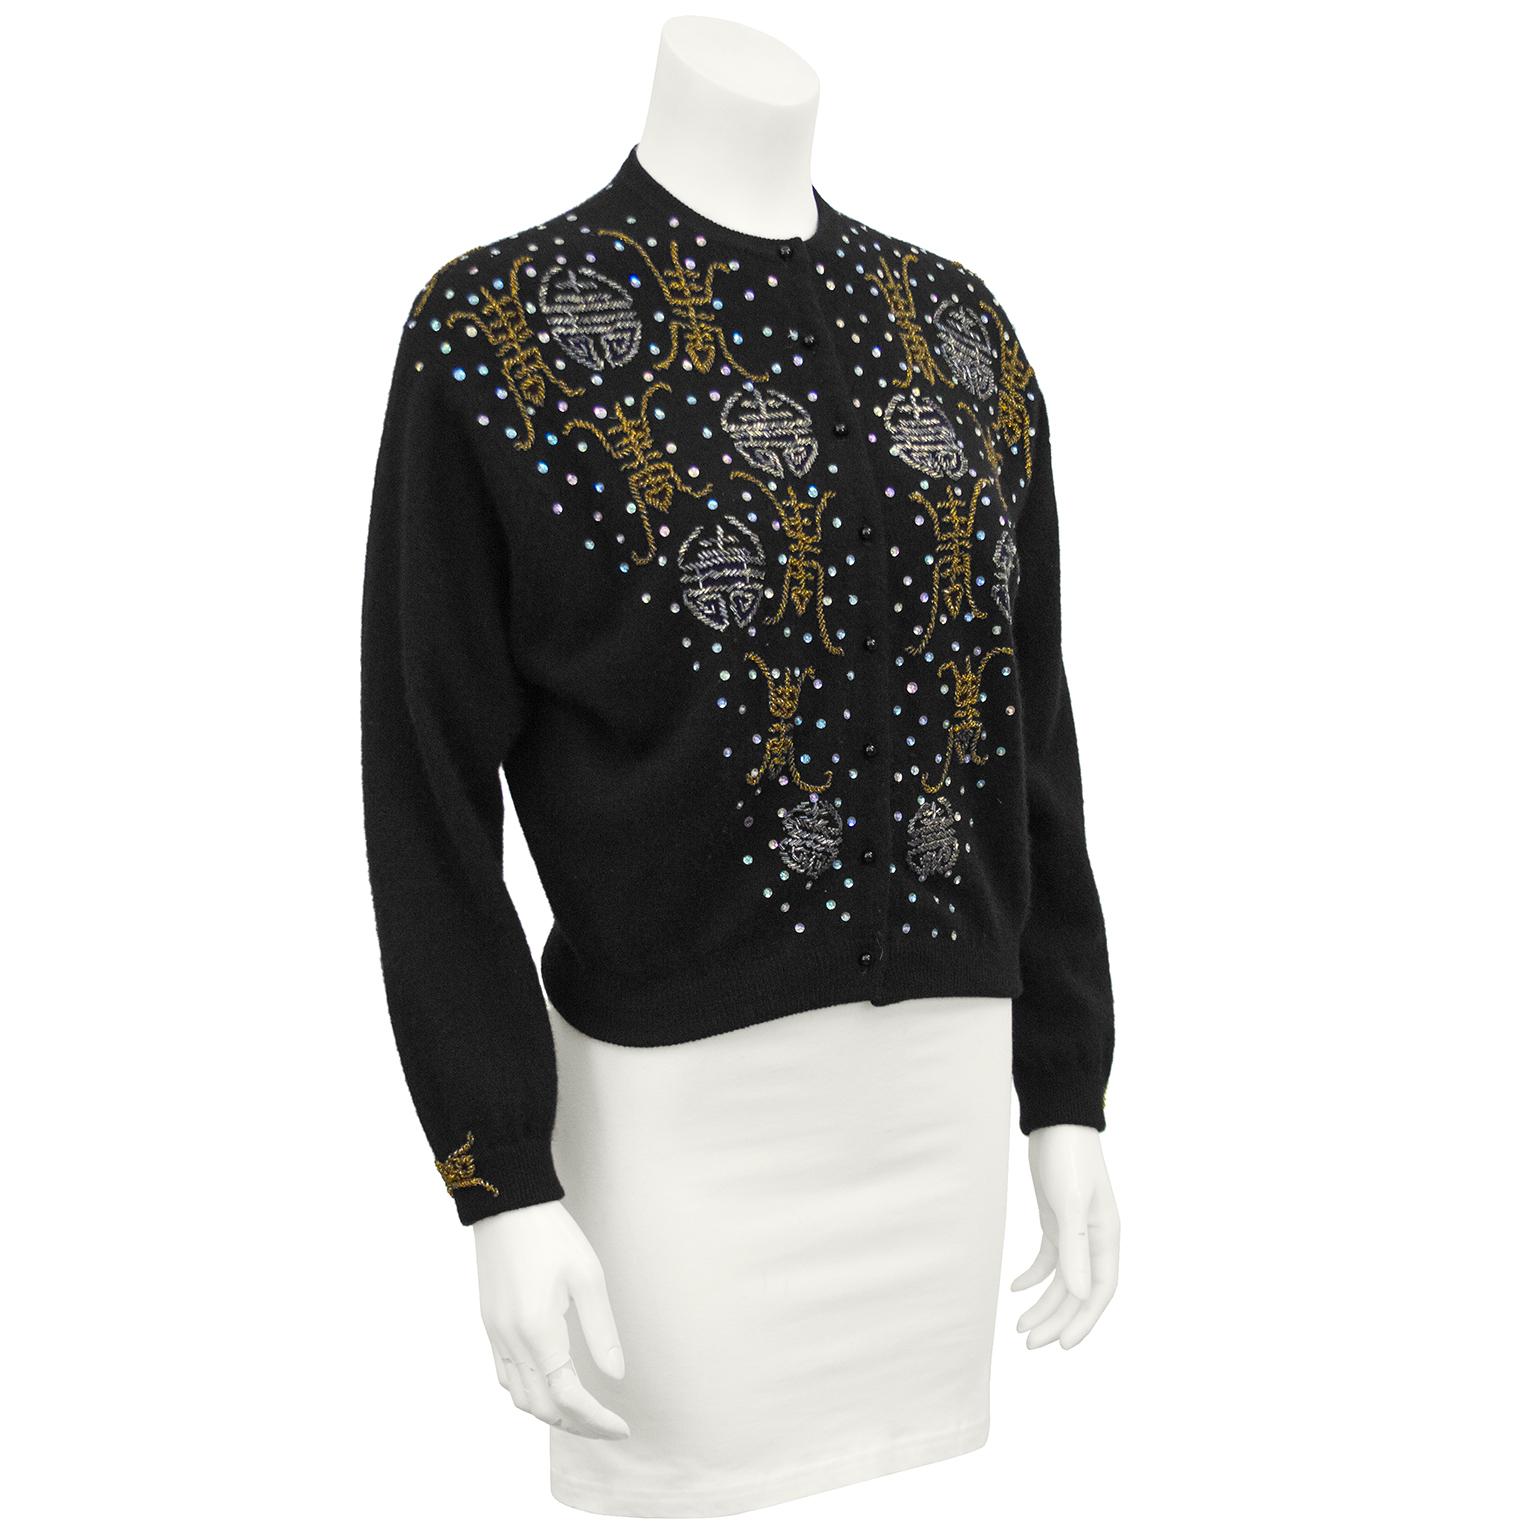 Elise Tu Hong Kong label black beaded cashmere sweater from the 1950s. Decorated down the front, along the back of the neck and on the cuffs with silver and gold beads resembling Chinese characters. Flat iridescent sequins scattered throughout. In